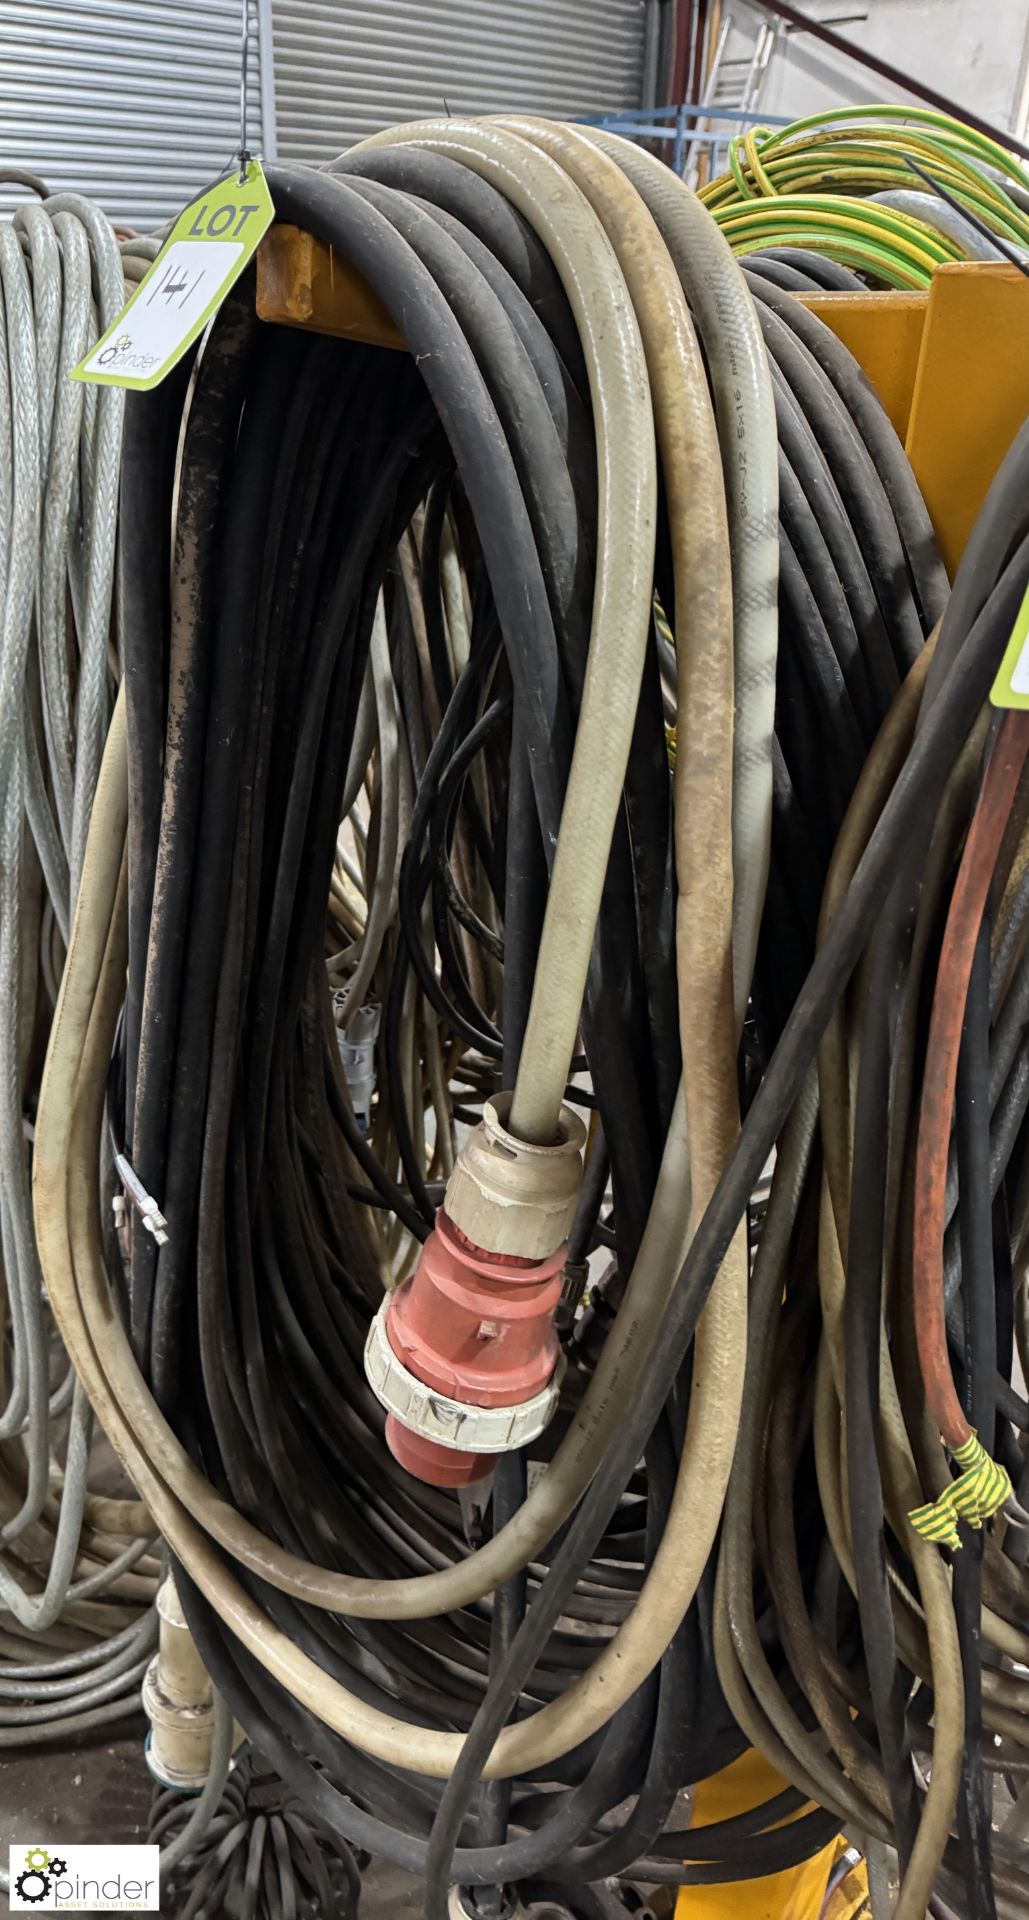 415volt and 240volt 32amp Extension Leads - Image 2 of 3